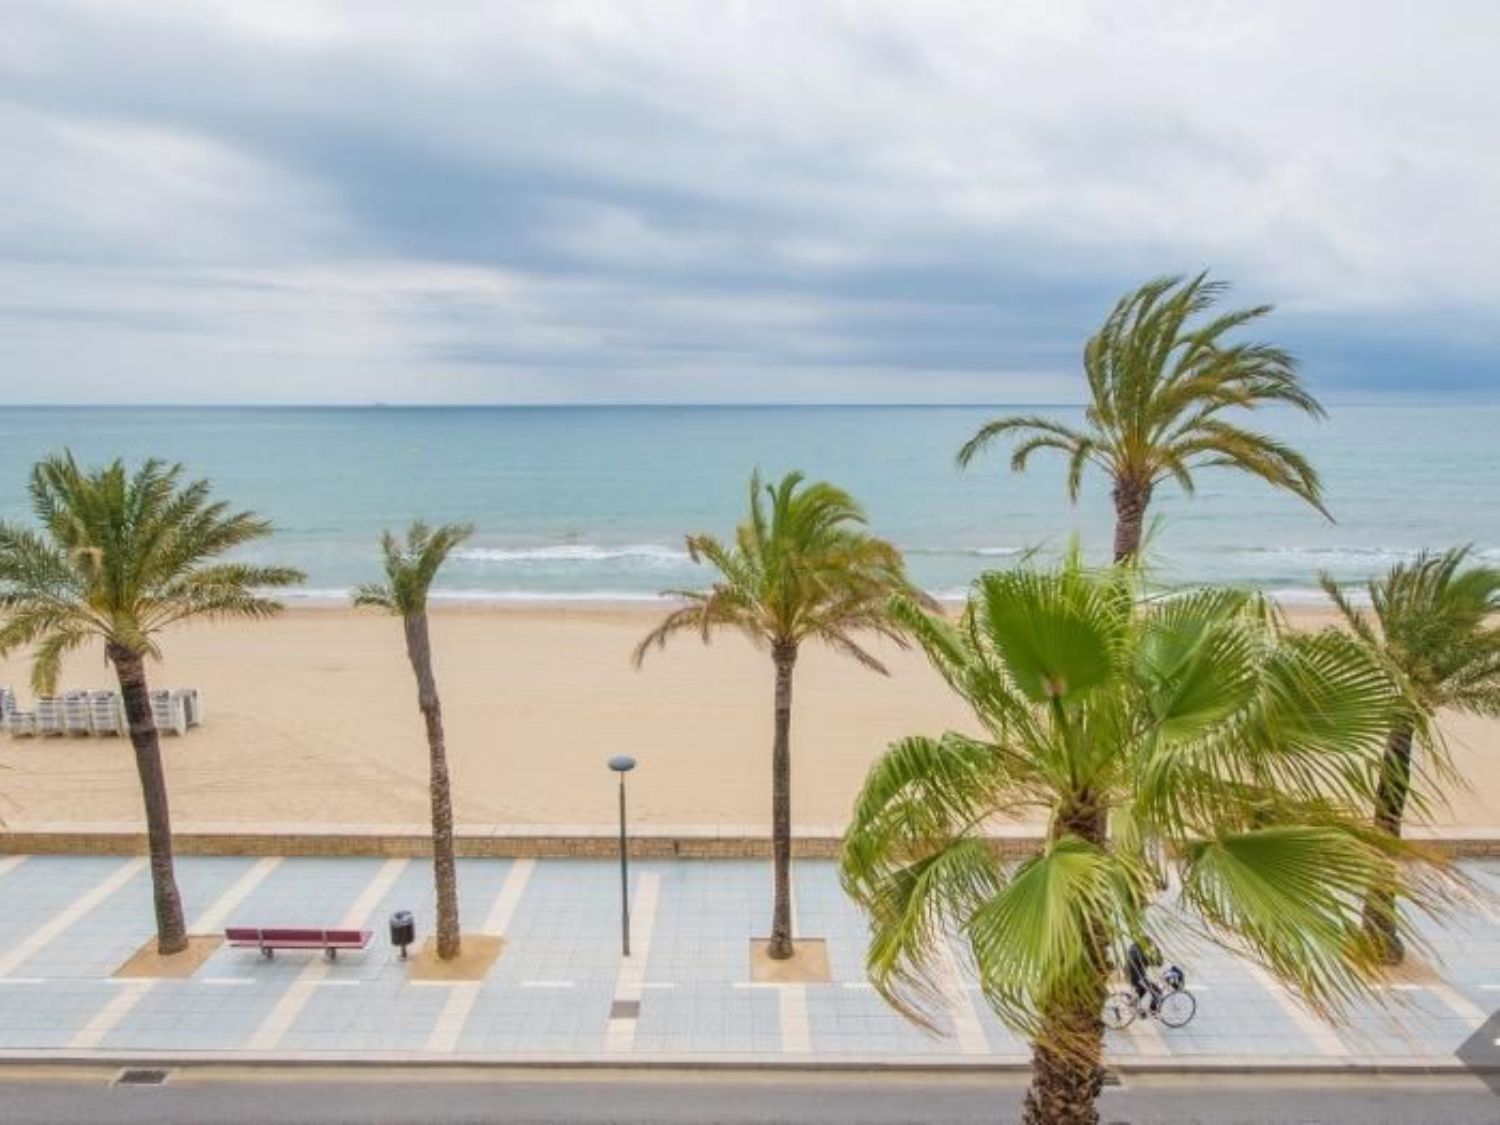 Flat for sale in Salou